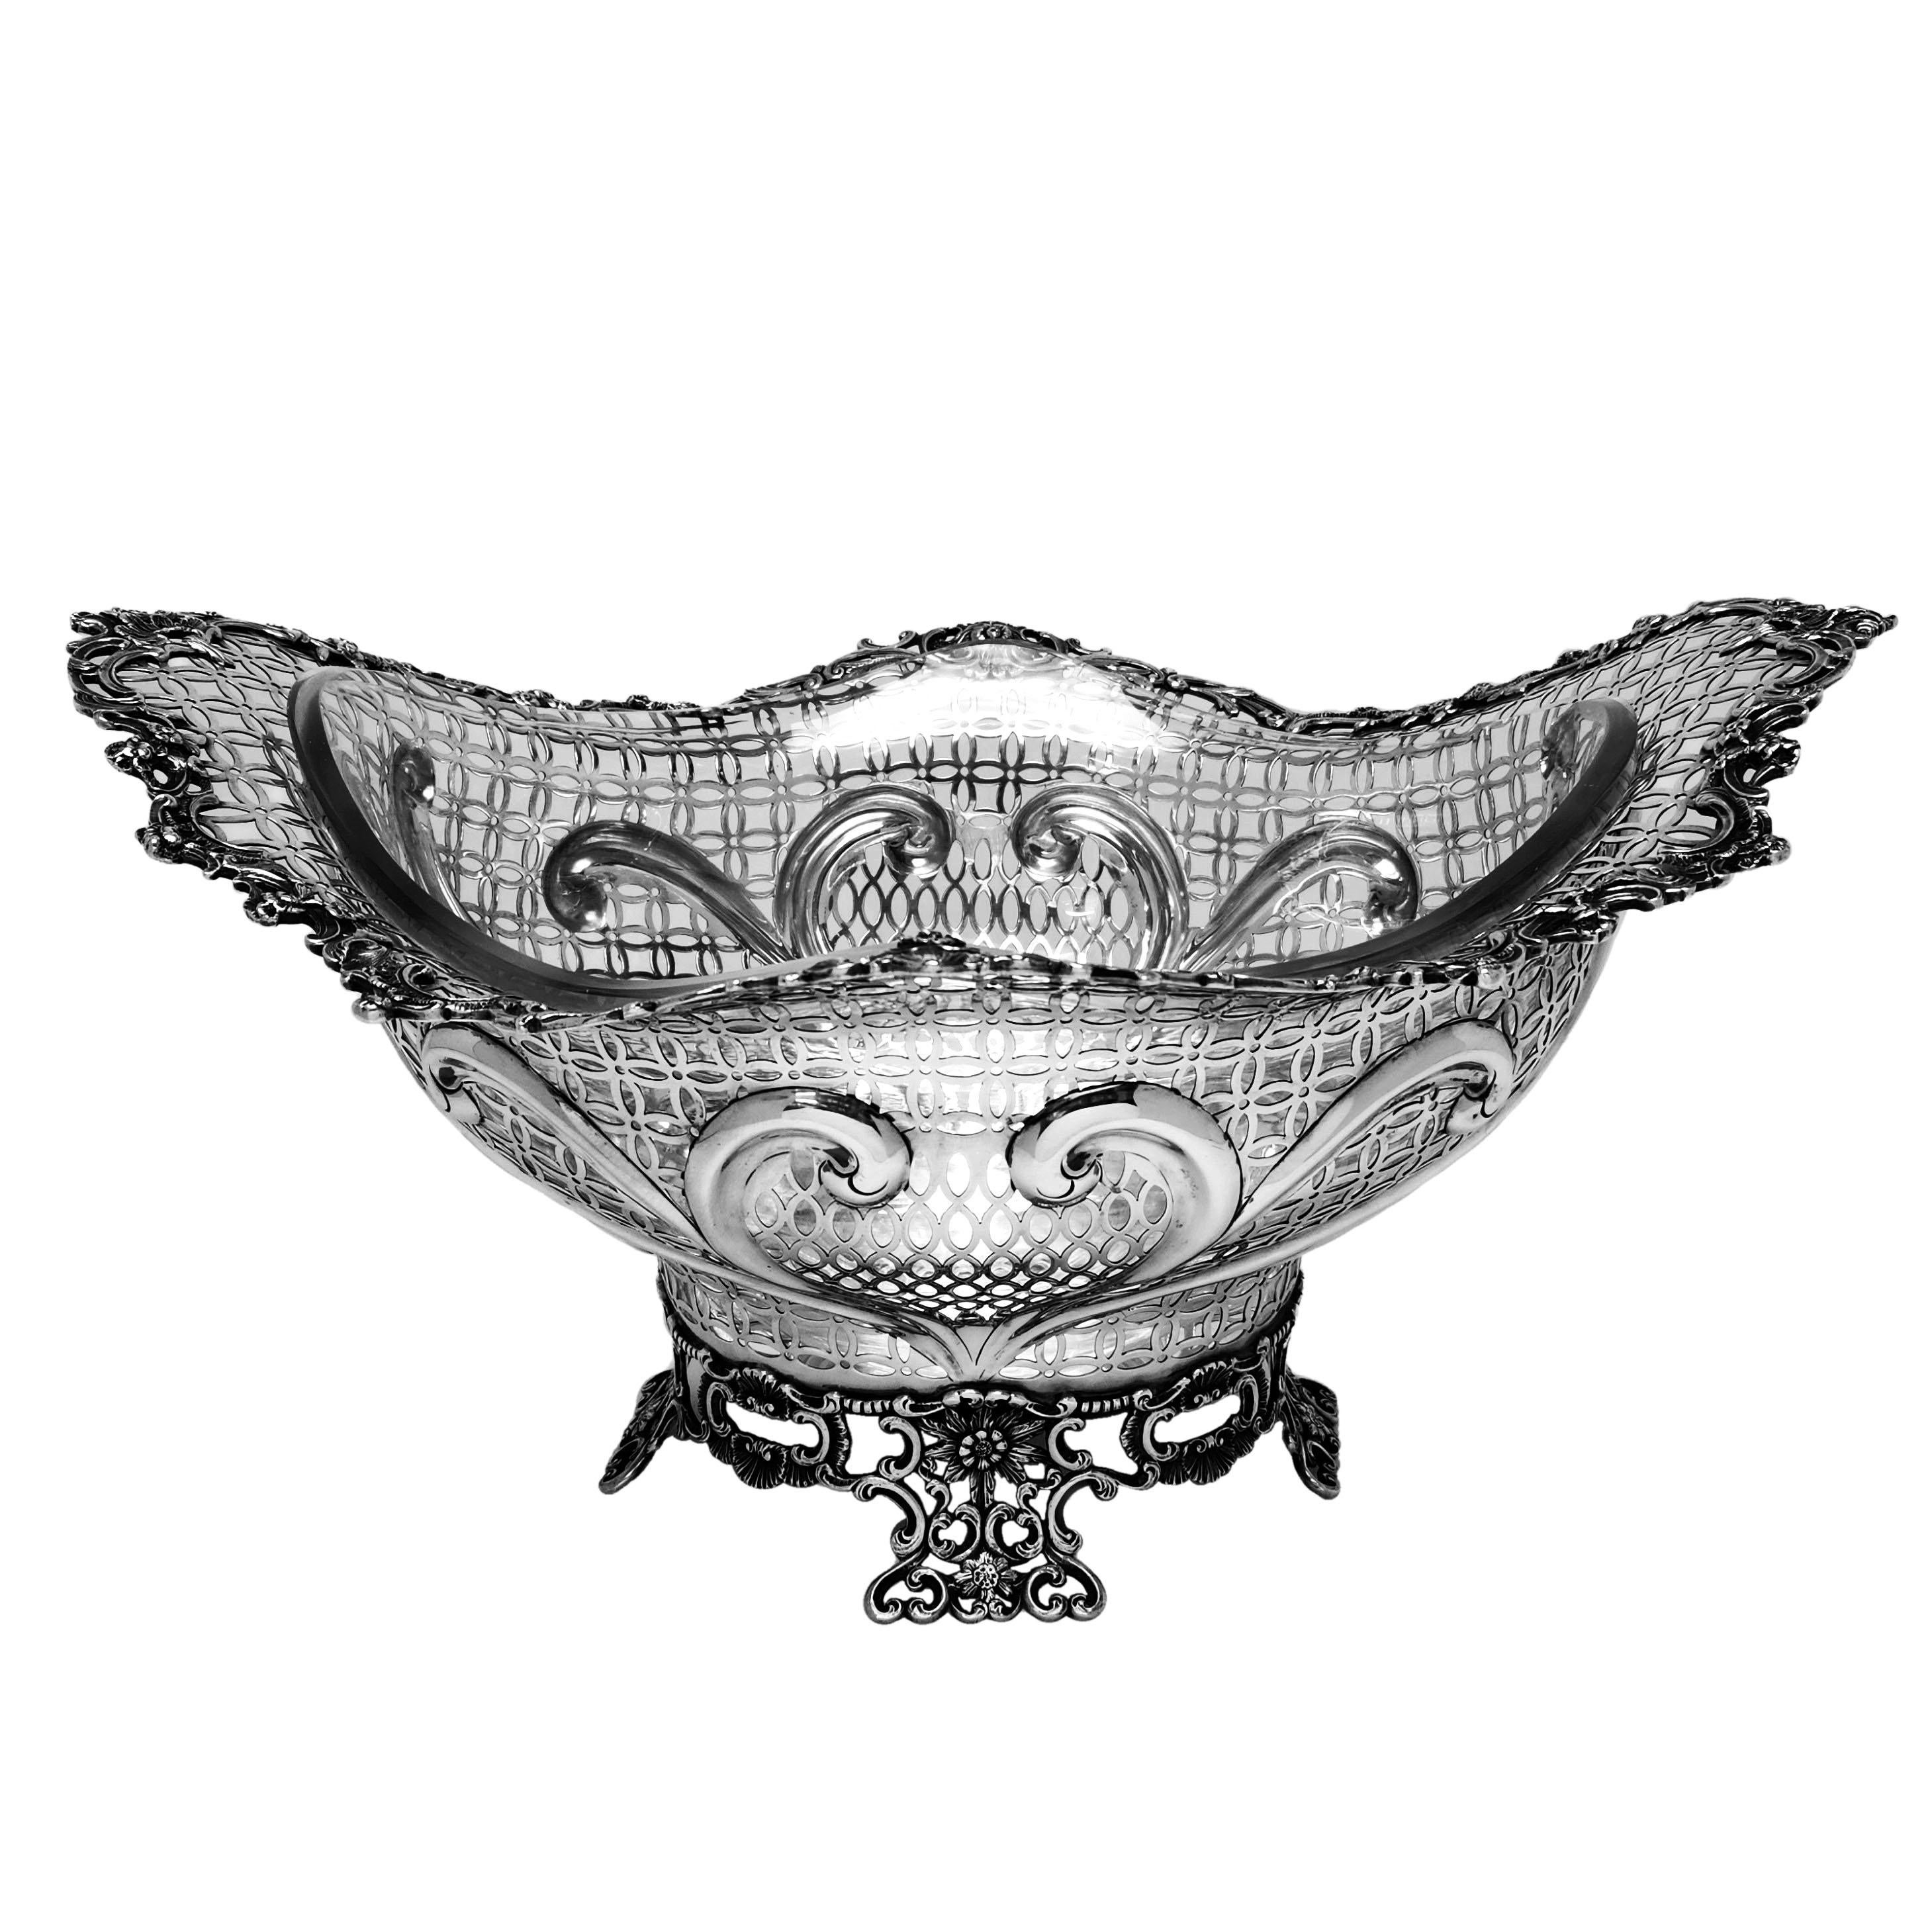 A magnificent antique Victorian solid silver basket with a heavy clear glass liner. This Basket is of substantial size and features an intricate pierced and chased patterns. The Rim and Foot of the bowl have a floral chased pattern.

Made in